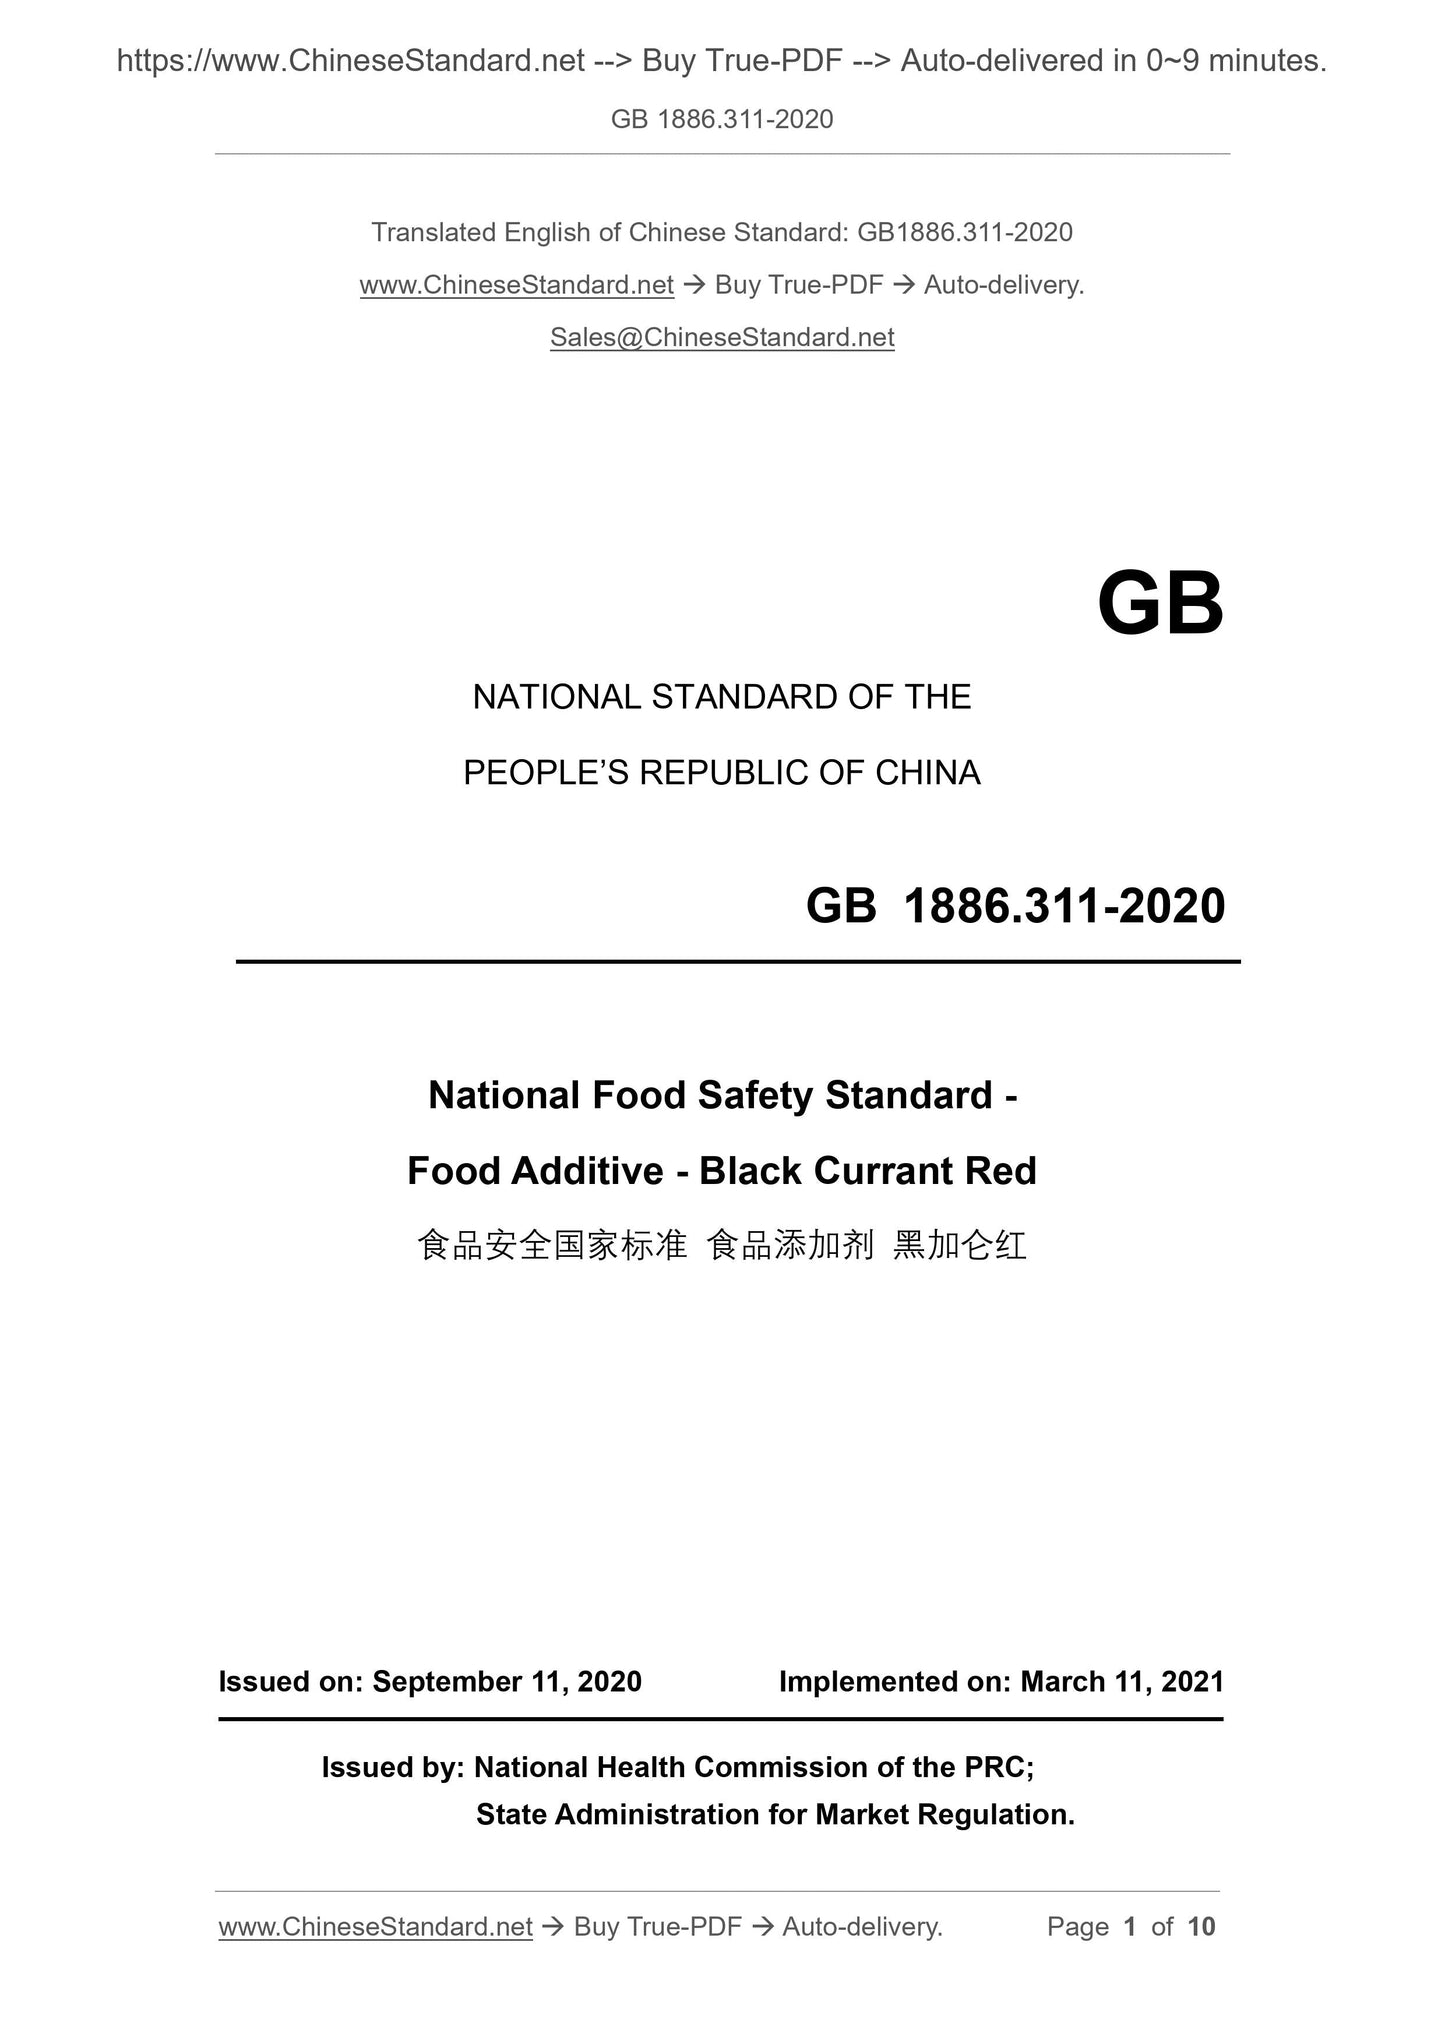 GB 1886.311-2020 Page 1